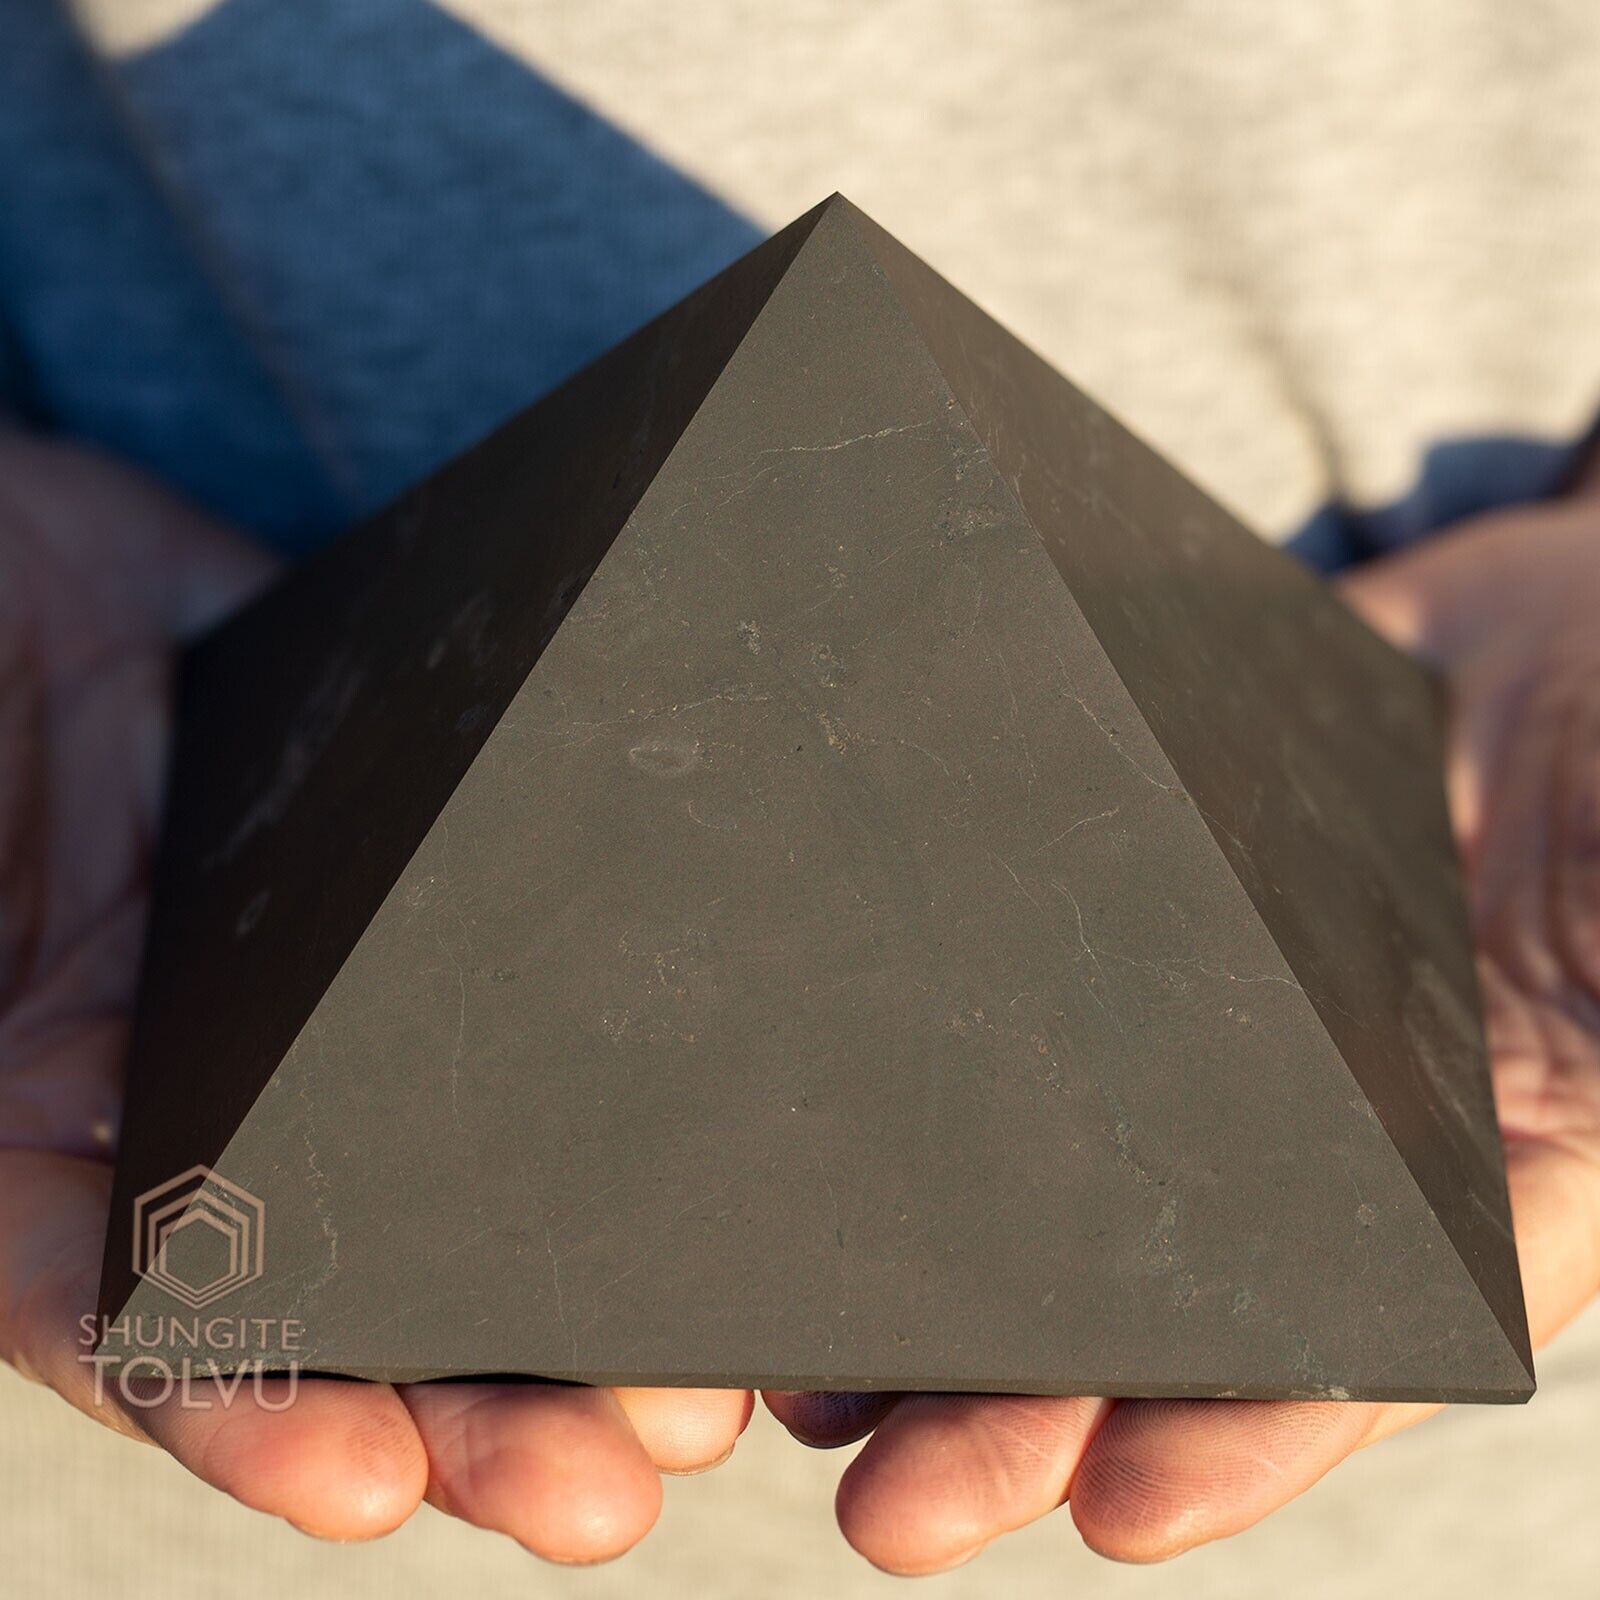 Authentic Shungite stone Pyramid - Big Size 4.7 in - Natural Surface, Tolvu